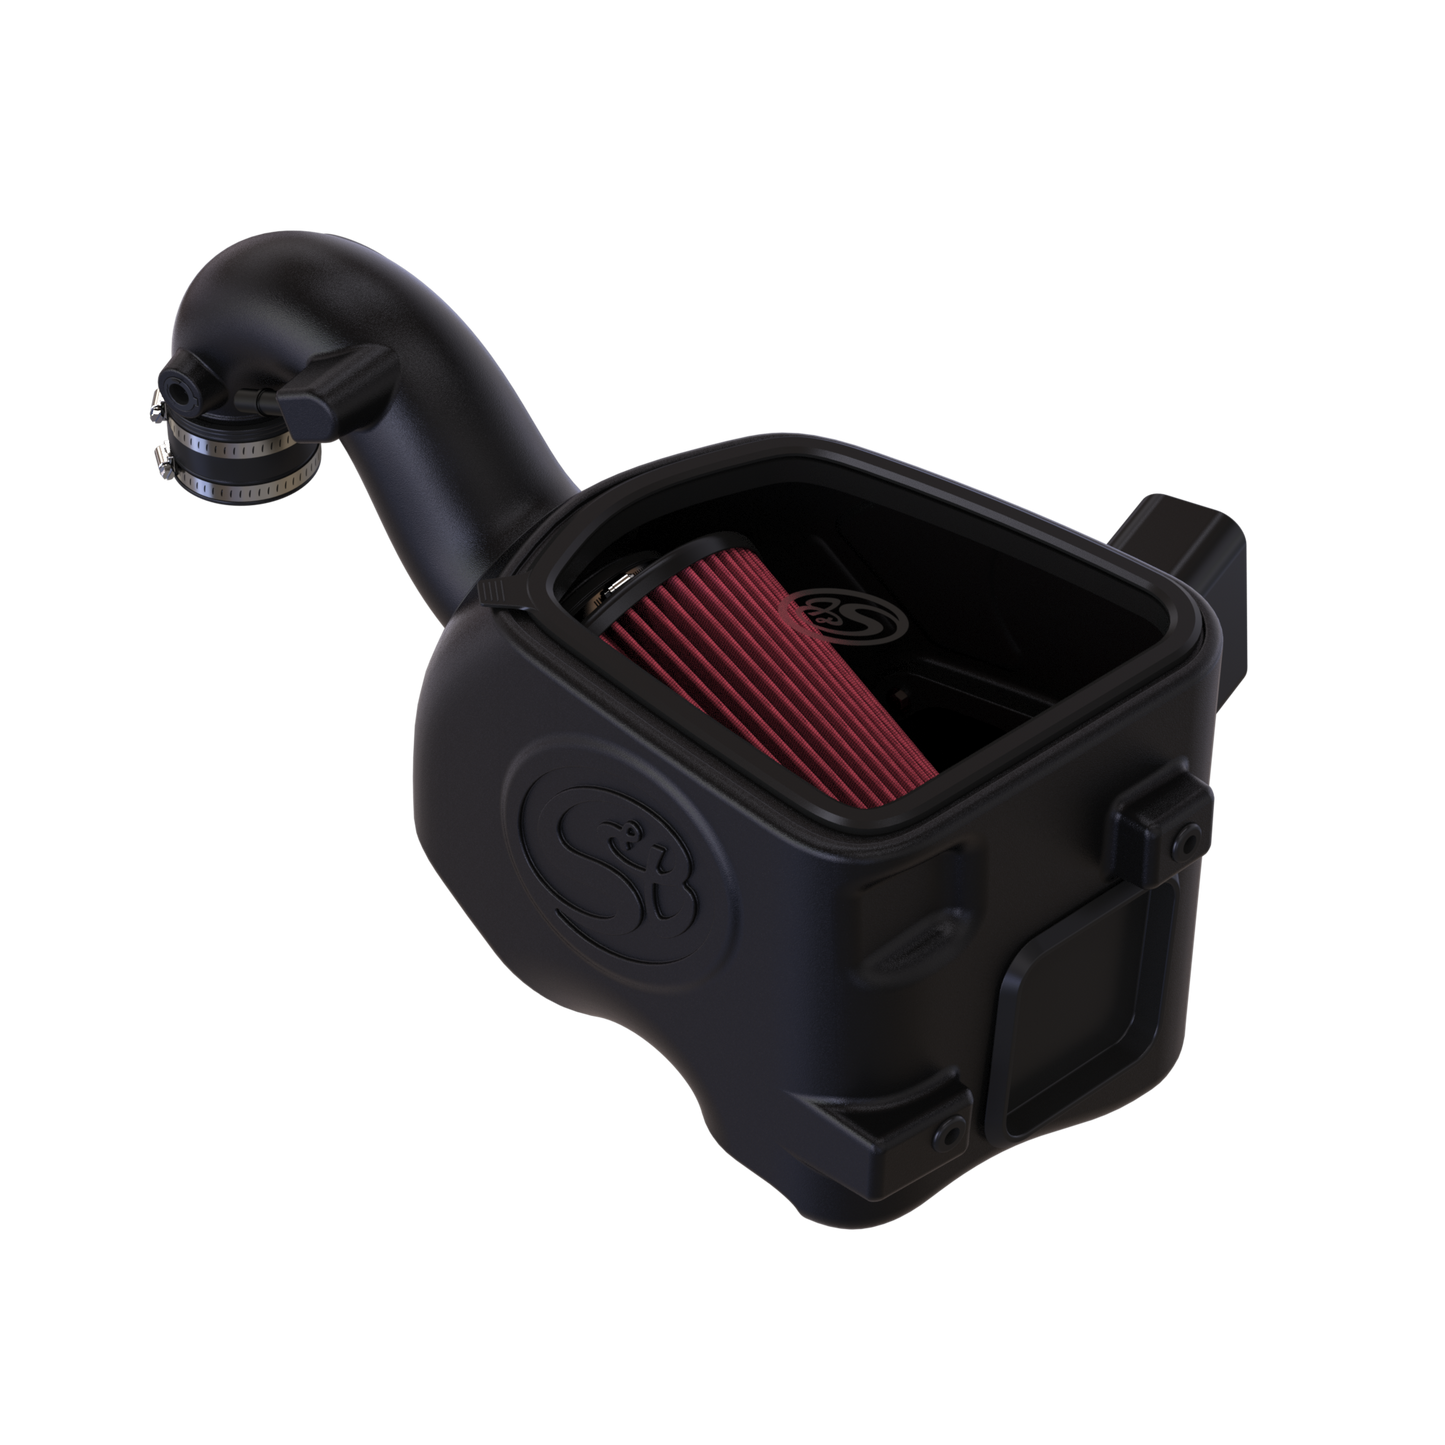 Cold Air Intake for 2019-2024 Dodge Ram 1500 / 2500 / 3500 5.7L Hemi (New Body Style)